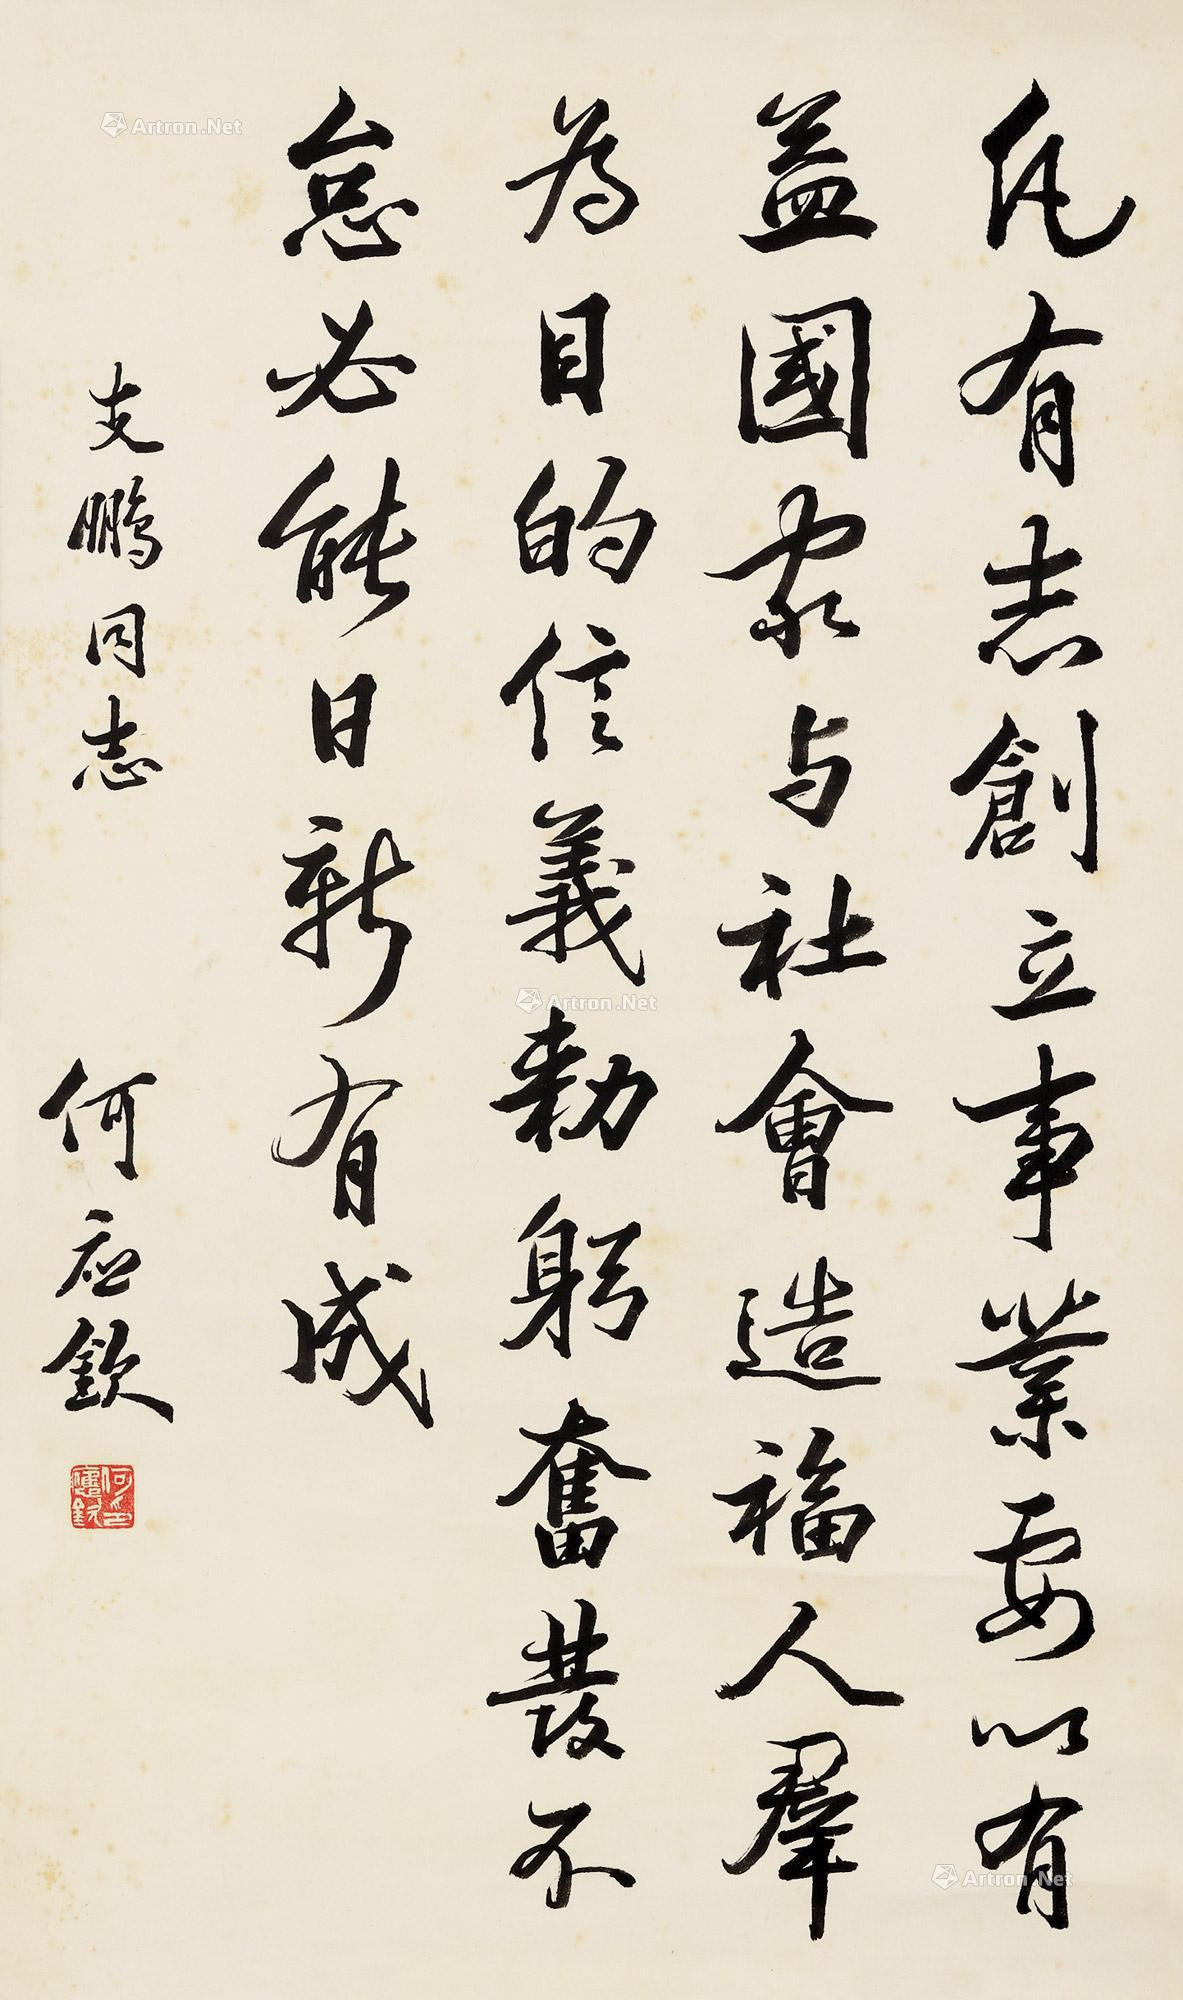 Calligraphy by He Yinqin